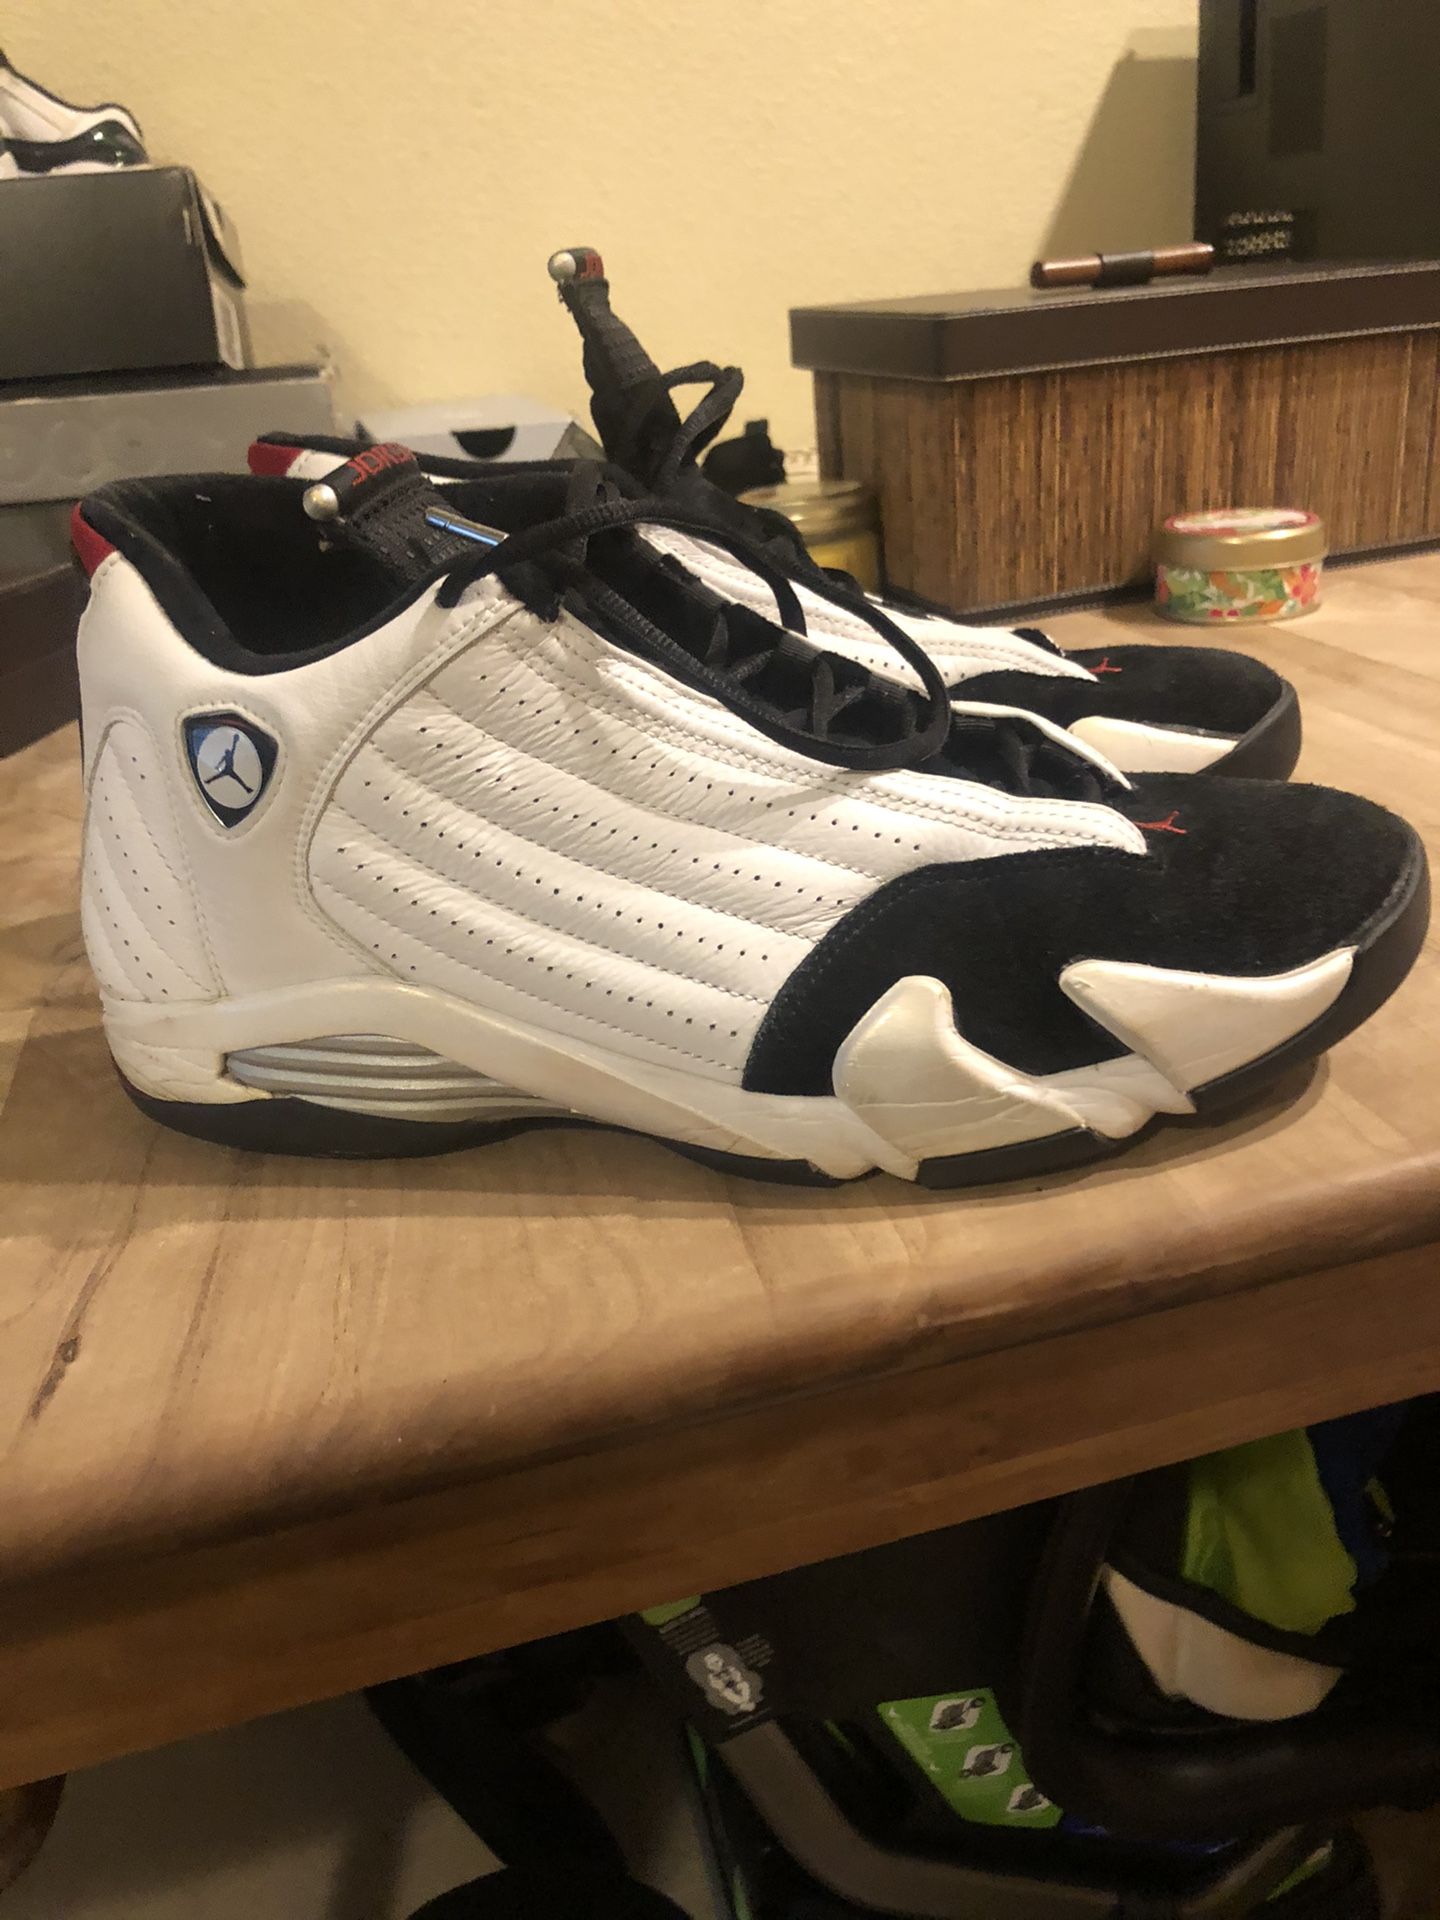 Jordan 14 2014 release no box size 12 Must go today! Trades for 11’s or 12’s $100 obo only if you want to trade!